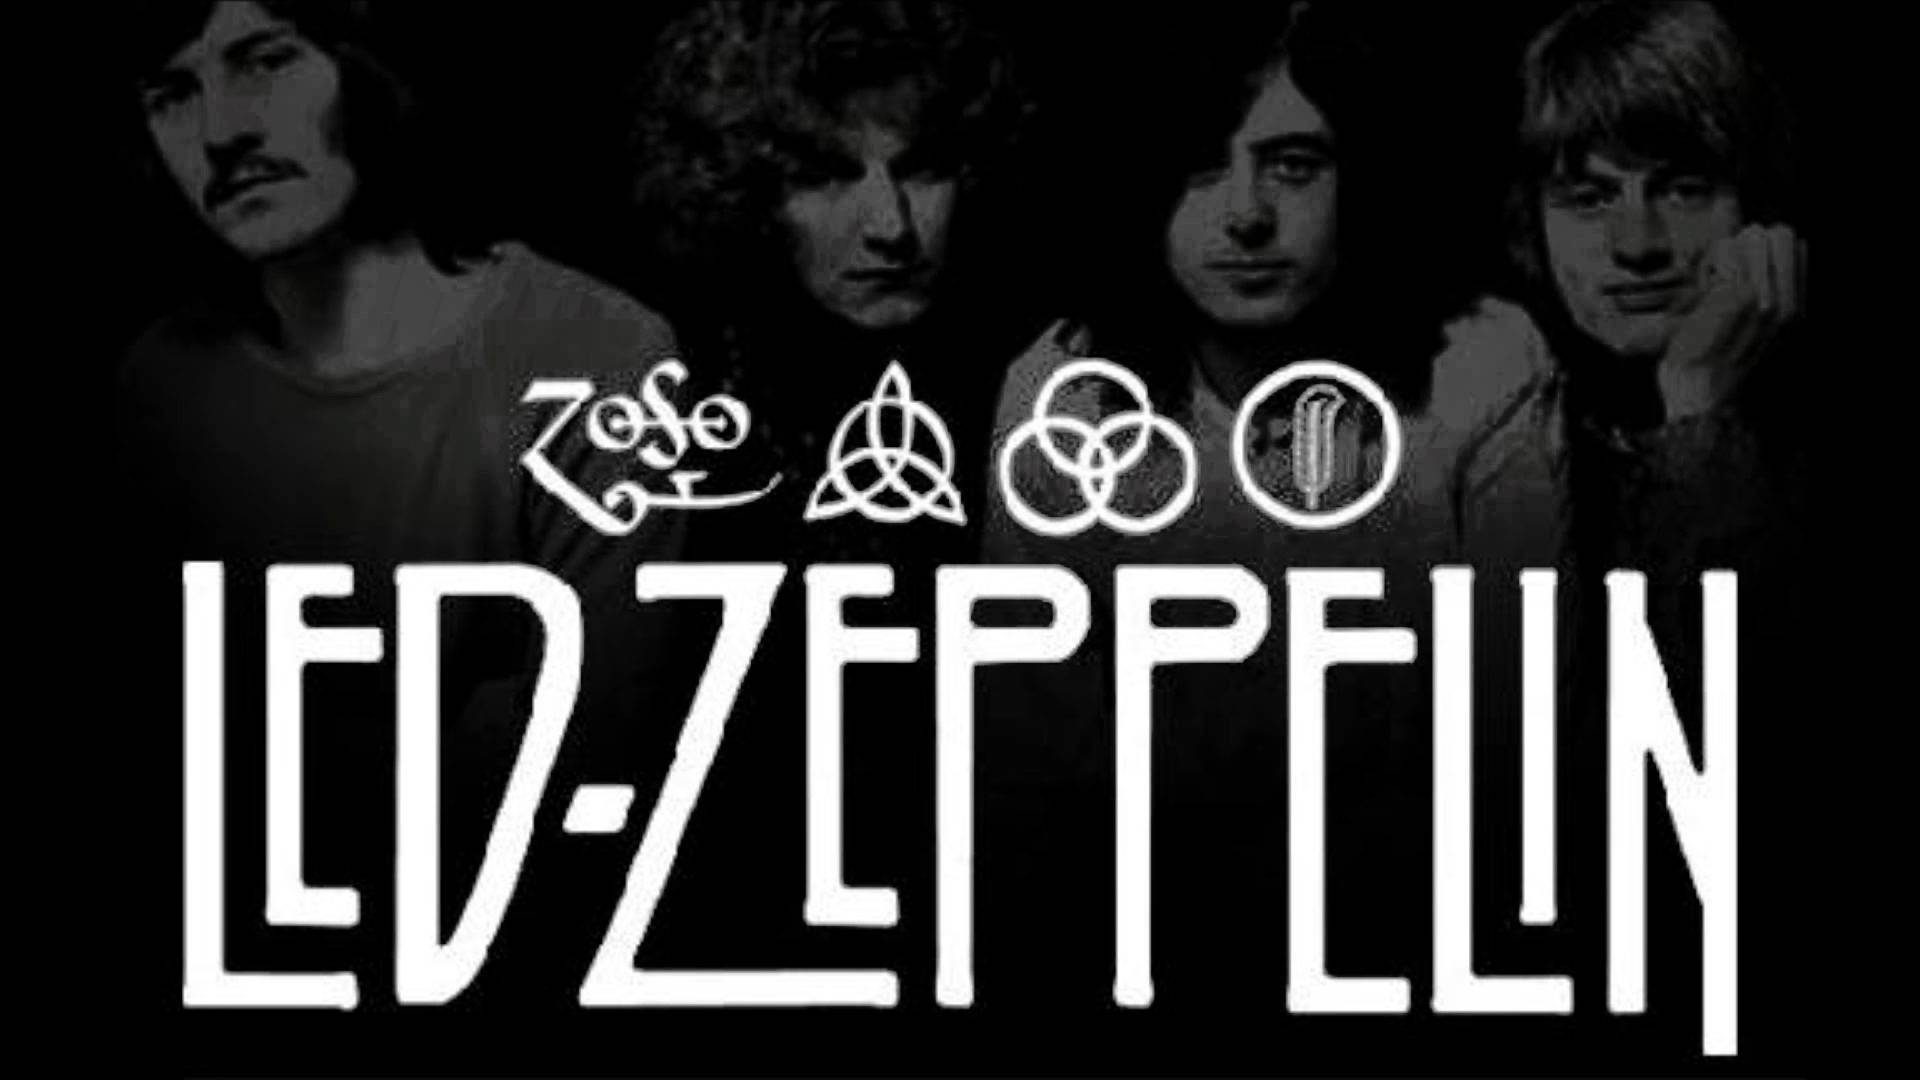 Led Zeppelin Hd Wallpapers Wallpaper Cave Images, Photos, Reviews